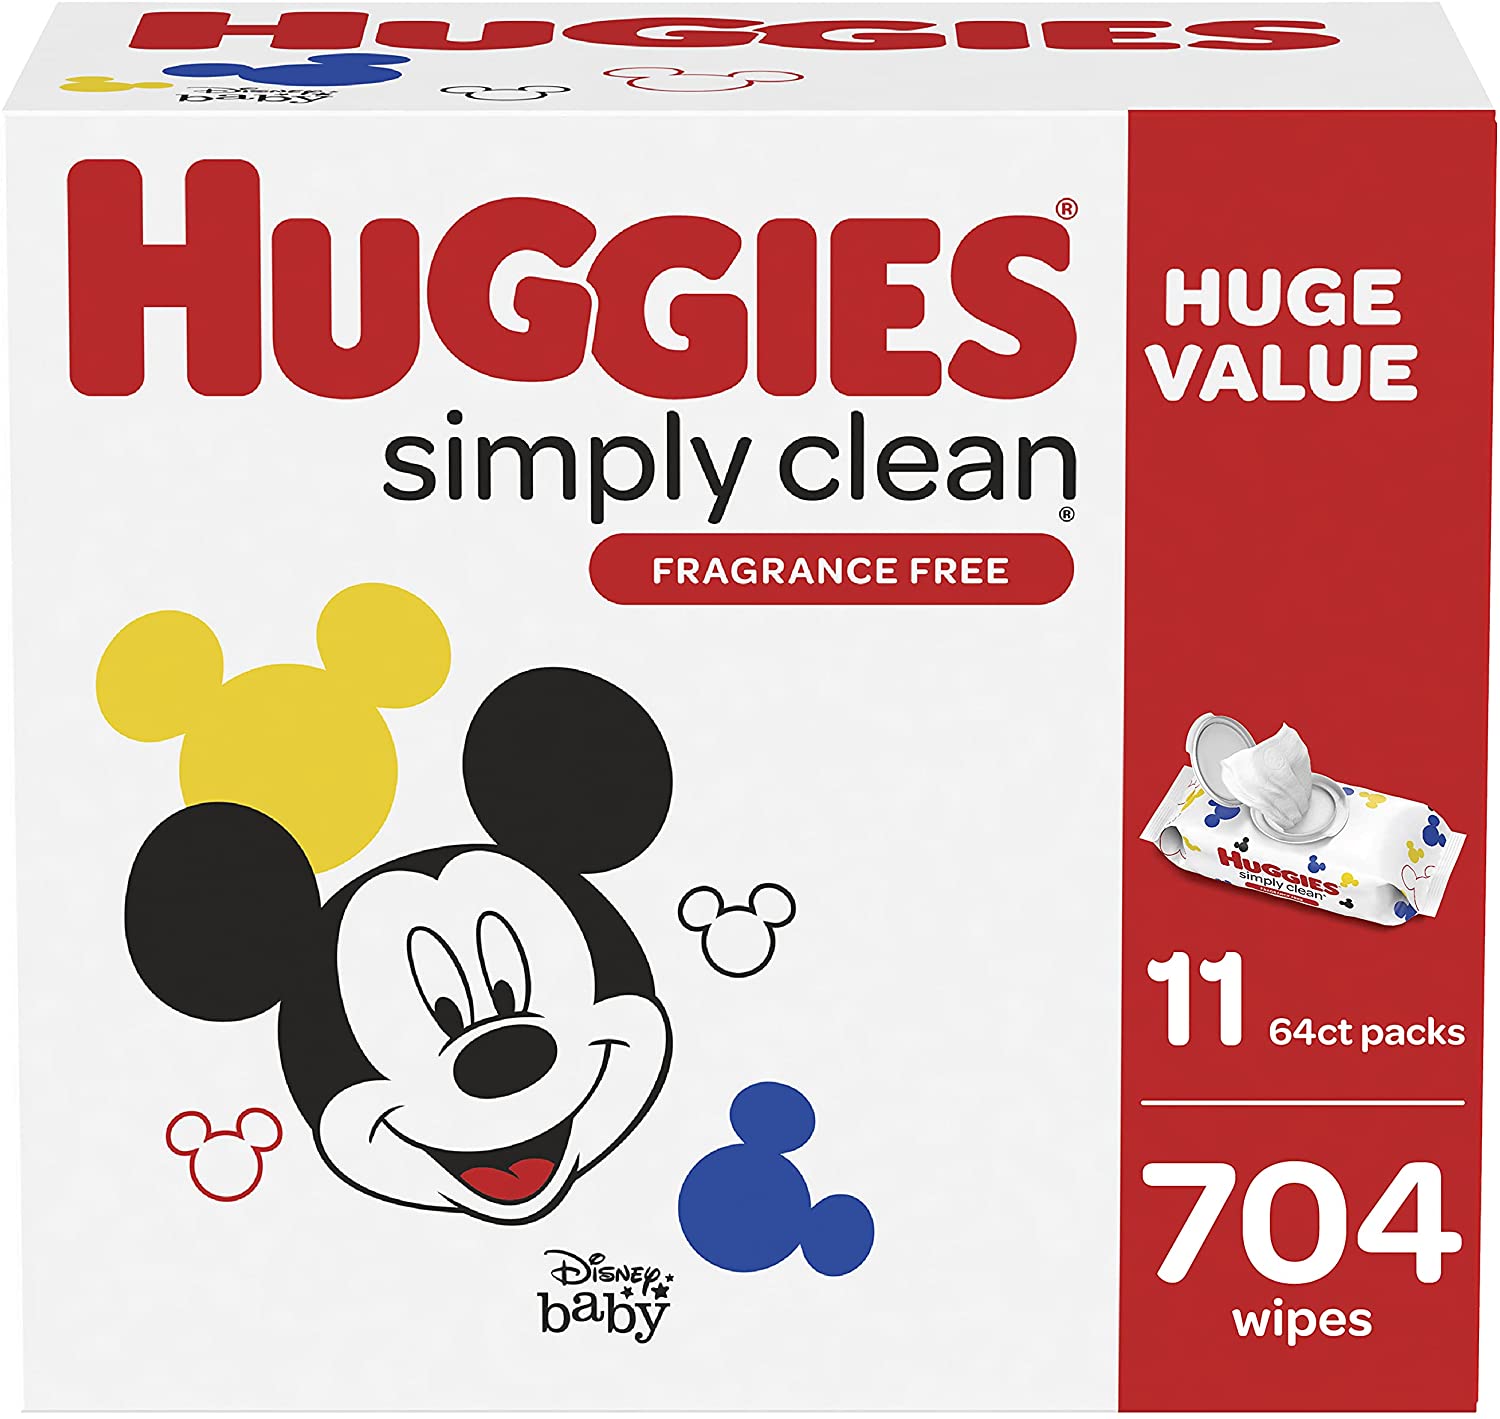 704-Count Huggies Simply Clean Baby Wipes (Unscented) $11.46 w/ coupon + Subscribe & Save